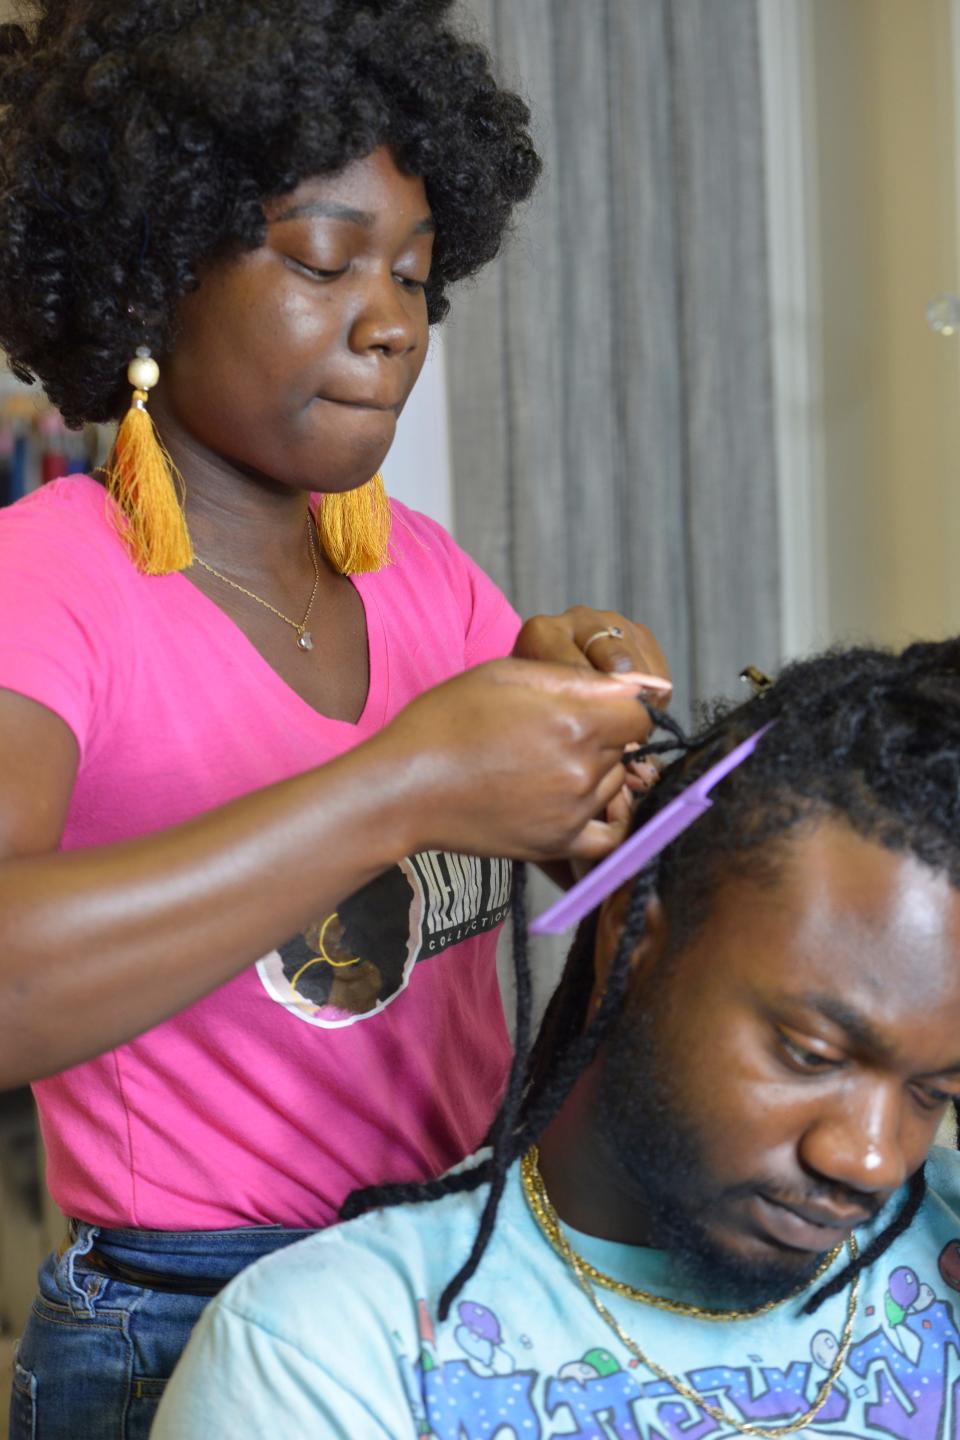 Keniqua Smith, of Divas Beauty Studio in Hyannis, calls her own natural hair her "crown." Smith said she's dismayed when her clients worry about how their hair will affect their ability to be hired for office positions.